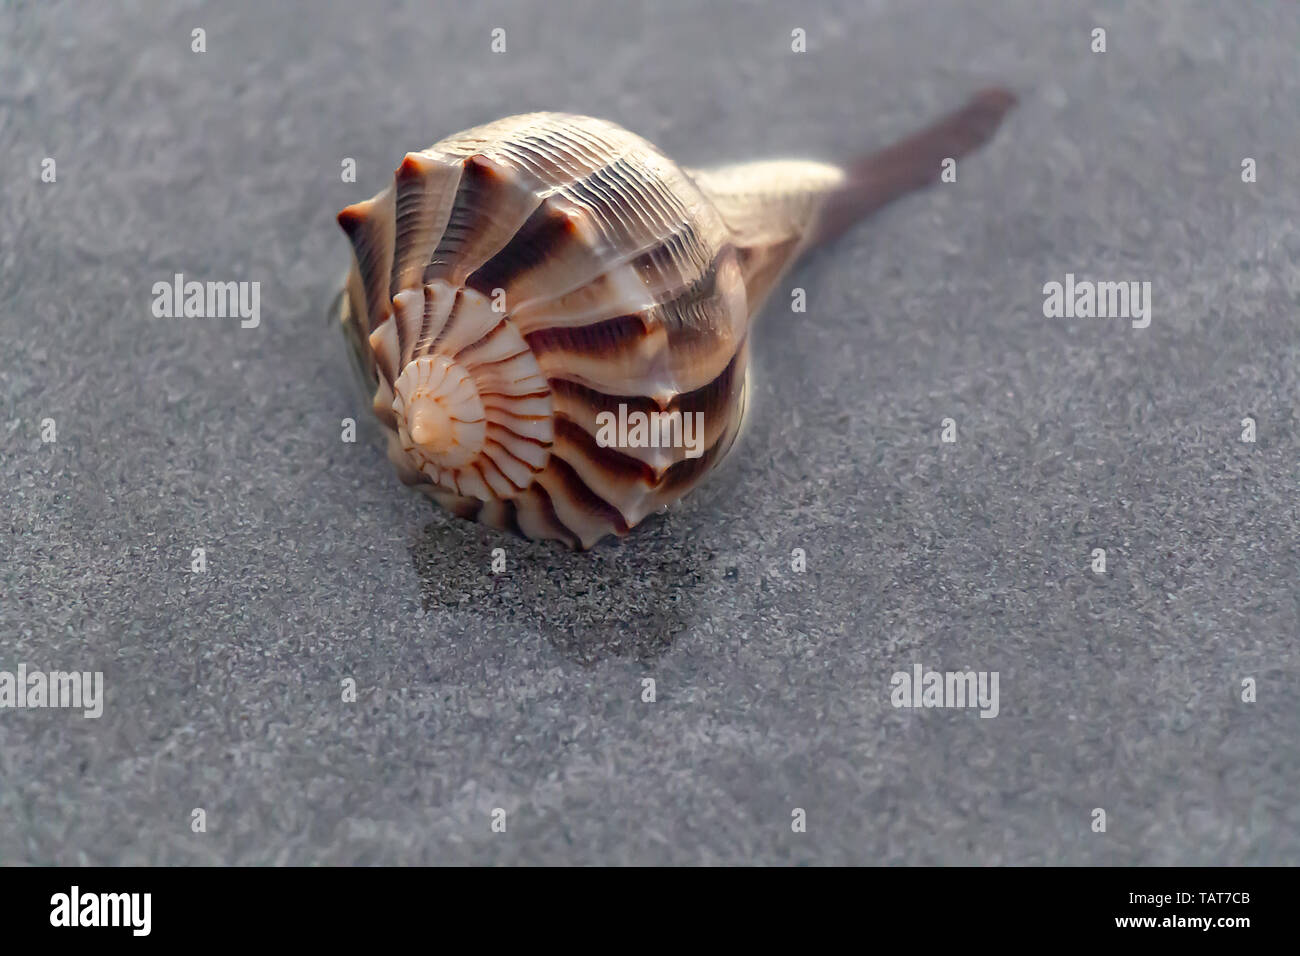 Live lightning whelk (Busycon perversum) in shallow water on Key Biscayne, Florida, USA. Stock Photo